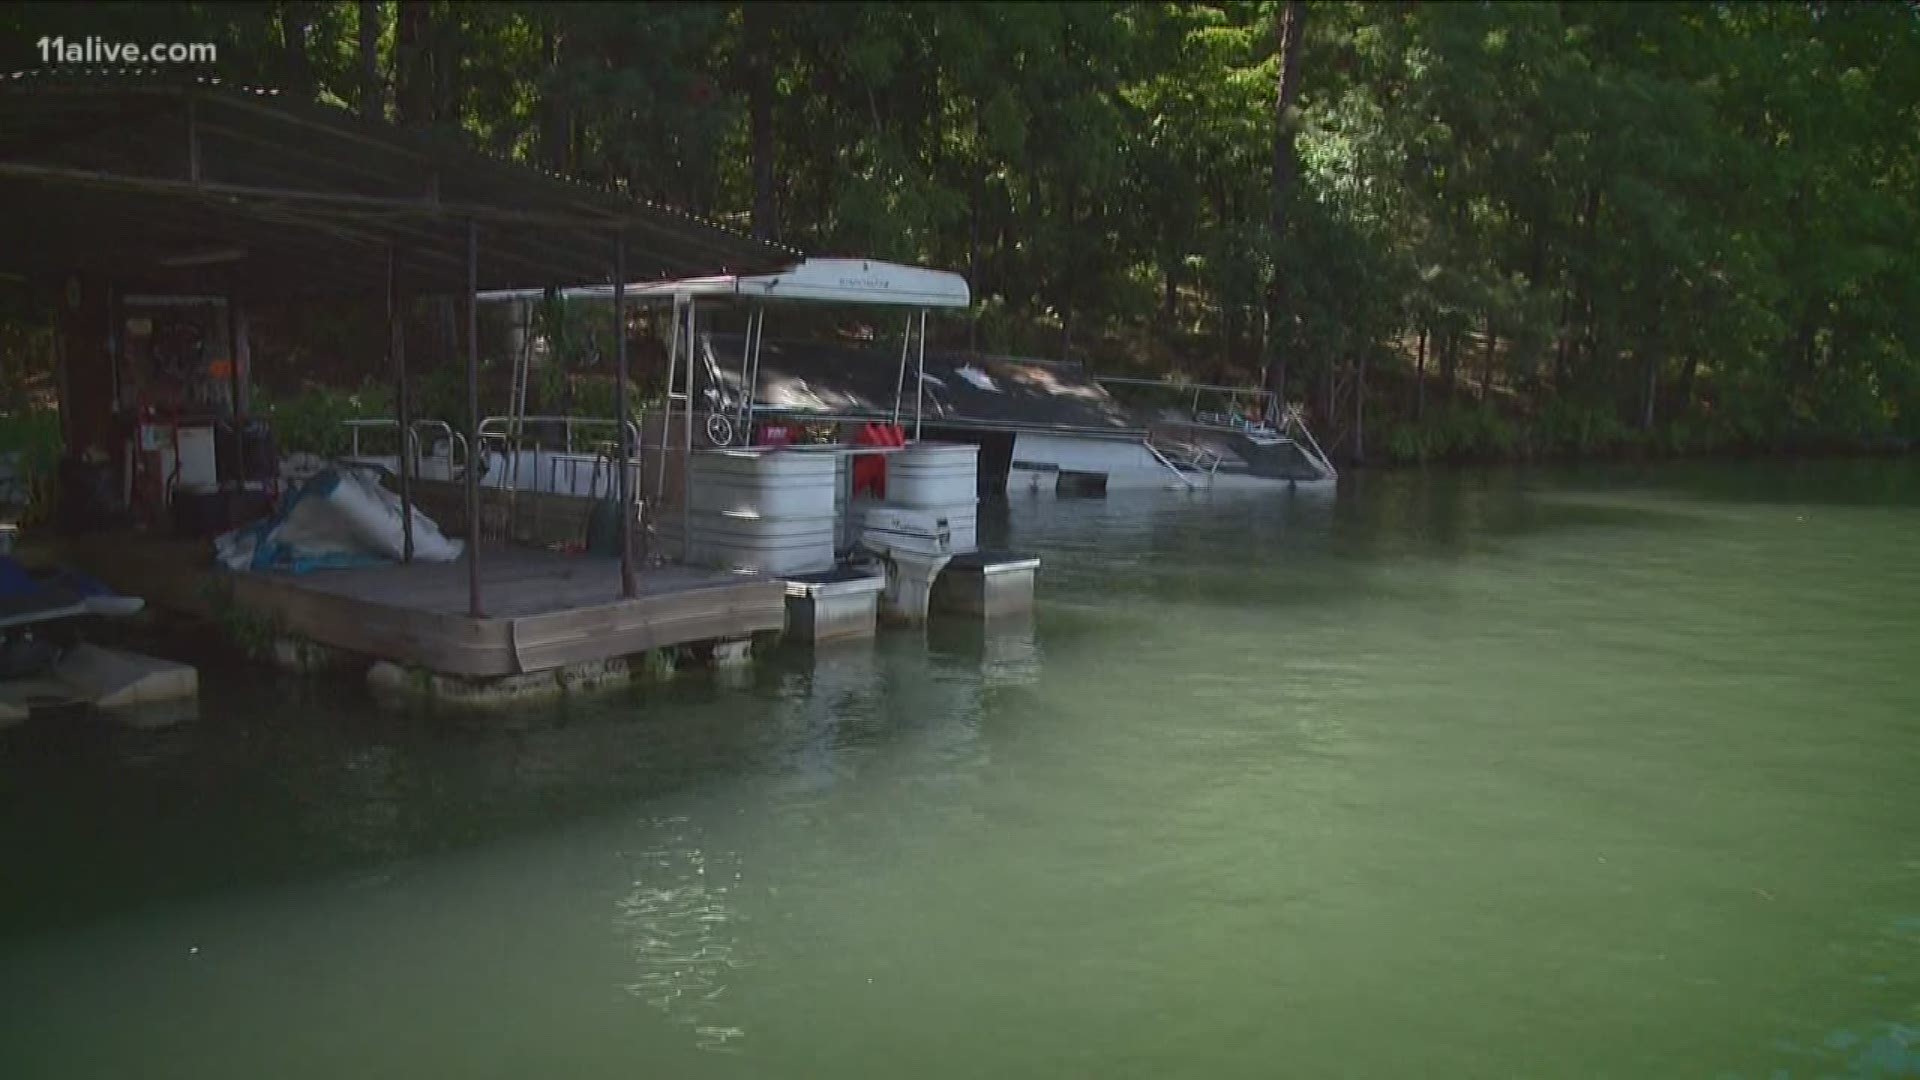 As thousands of Georgians hit Atlanta’s favorite lake this holiday, they may be unaware of the dangers below the surface.